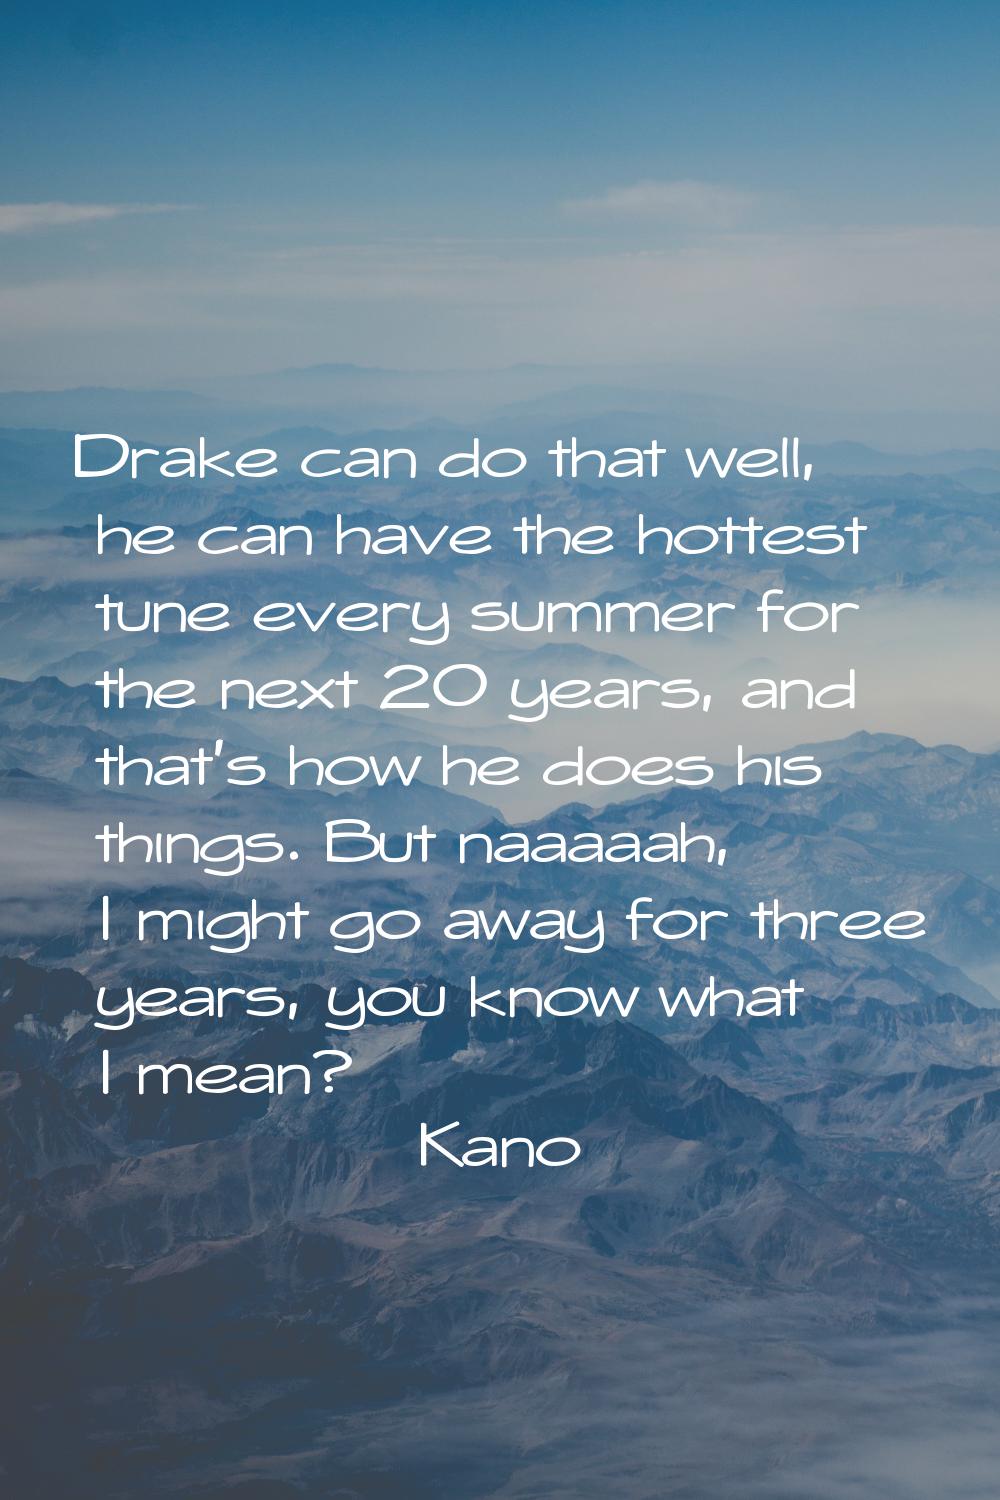 Drake can do that well, he can have the hottest tune every summer for the next 20 years, and that's